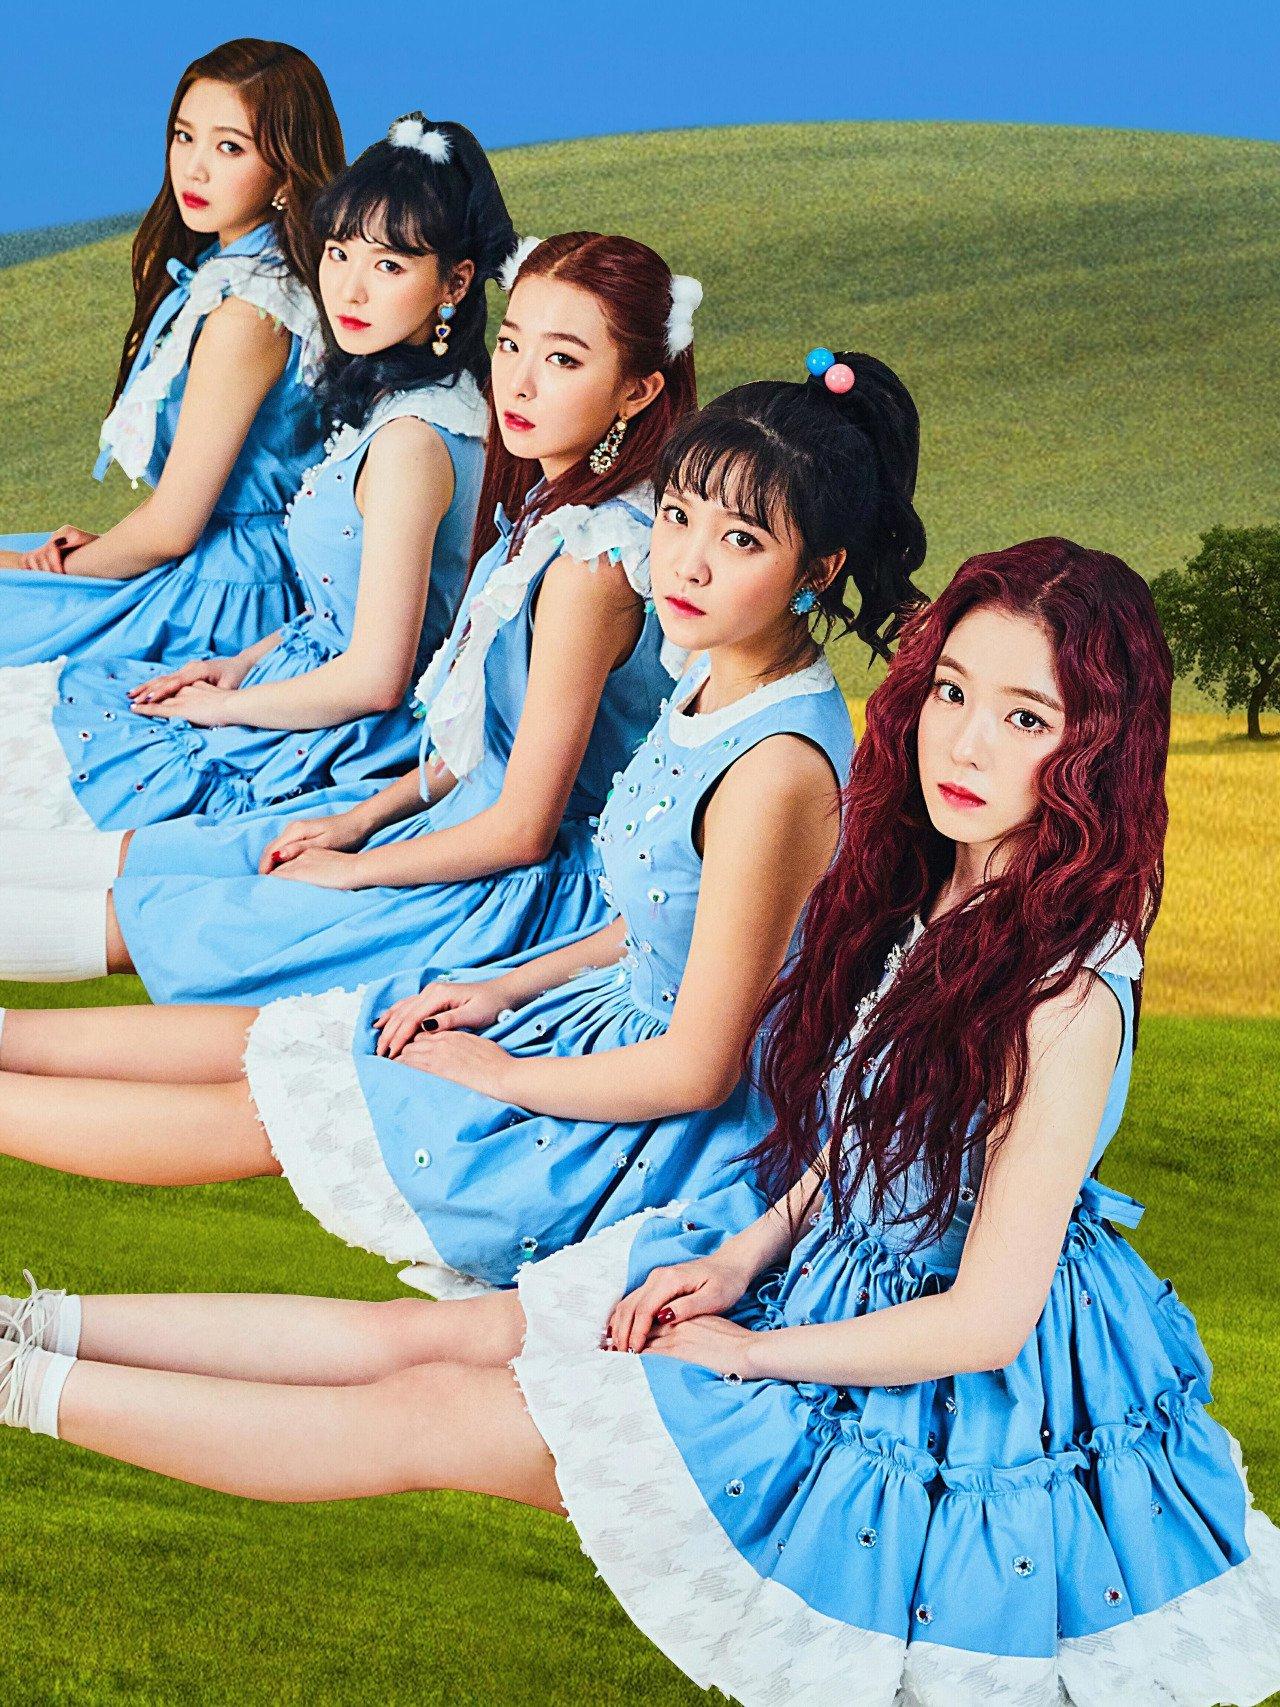 Red Velvet Android IPhone Wallpaper KPOP Image